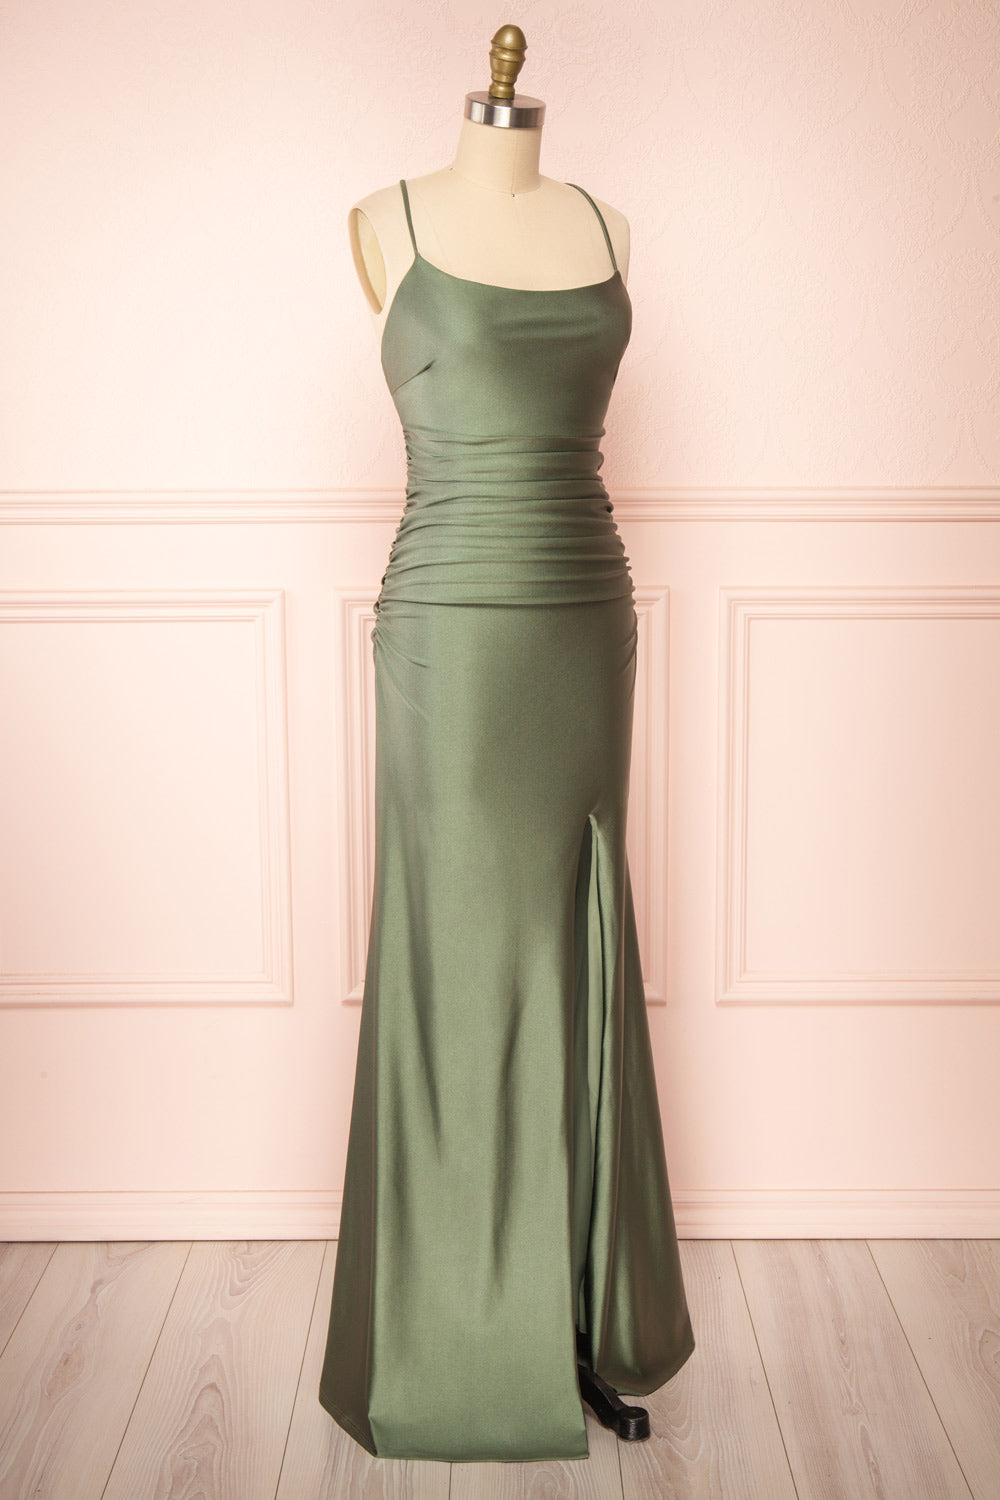 Sonia Sage Backless Mermaid Maxi Dress w/ Slit | Boutique 1861side view